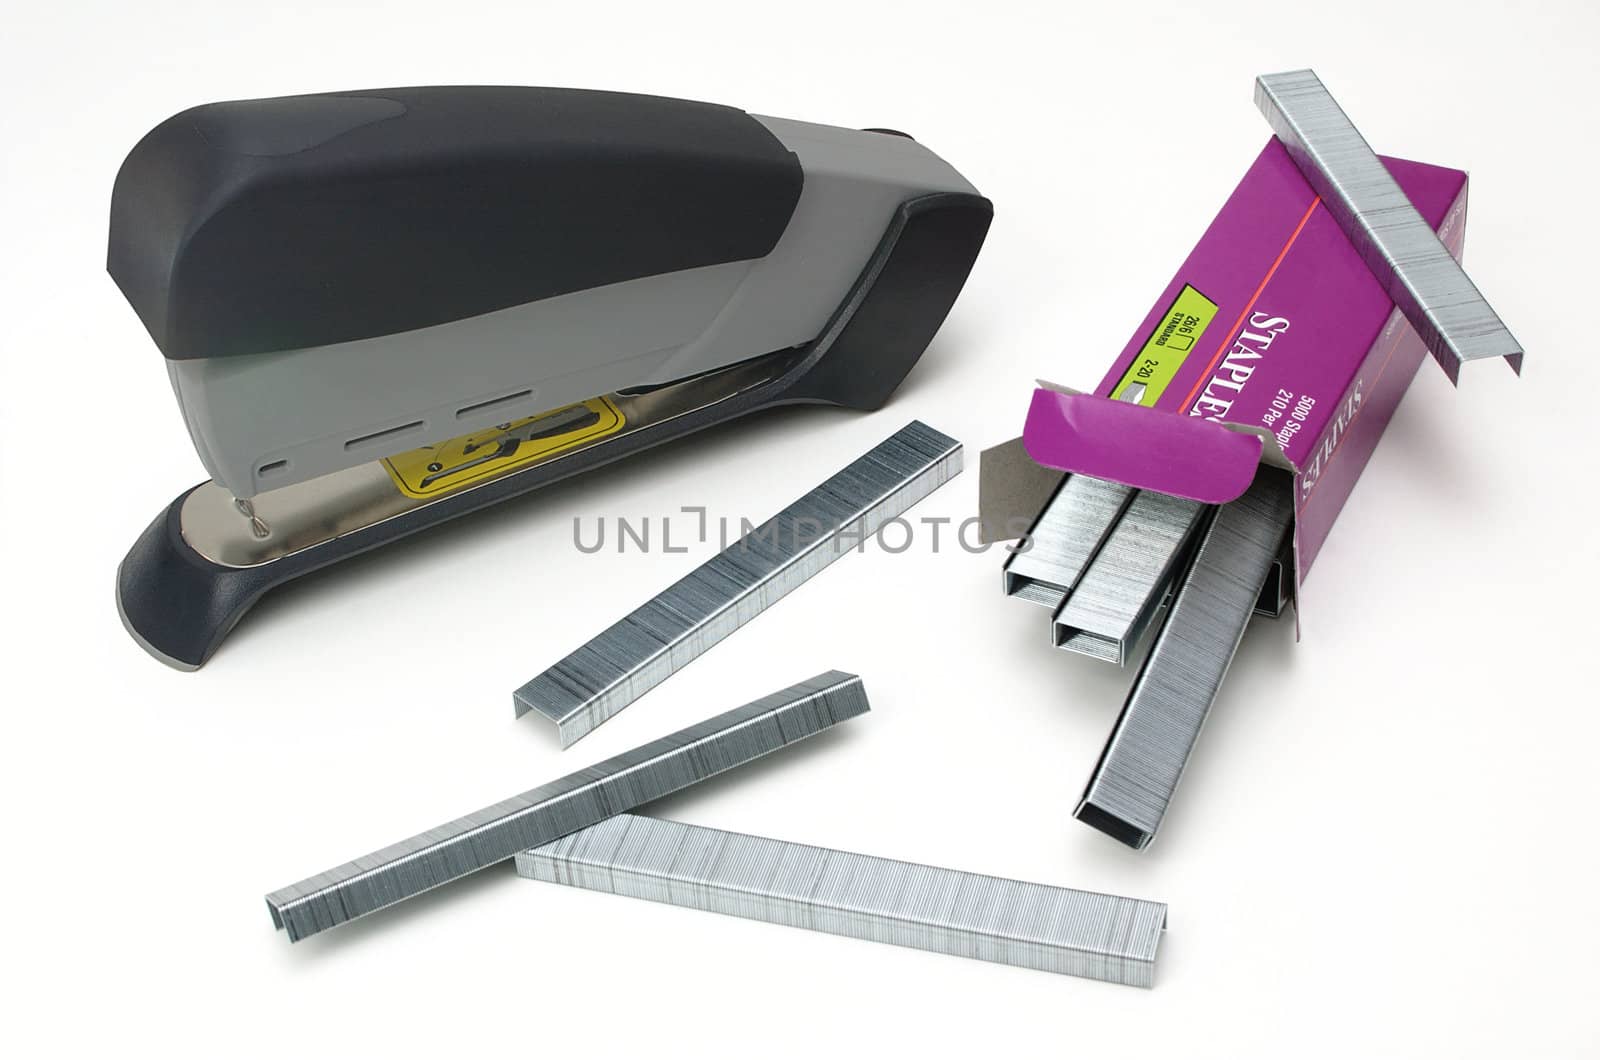 A stapler and some staples, including the box, isolated against a white background.